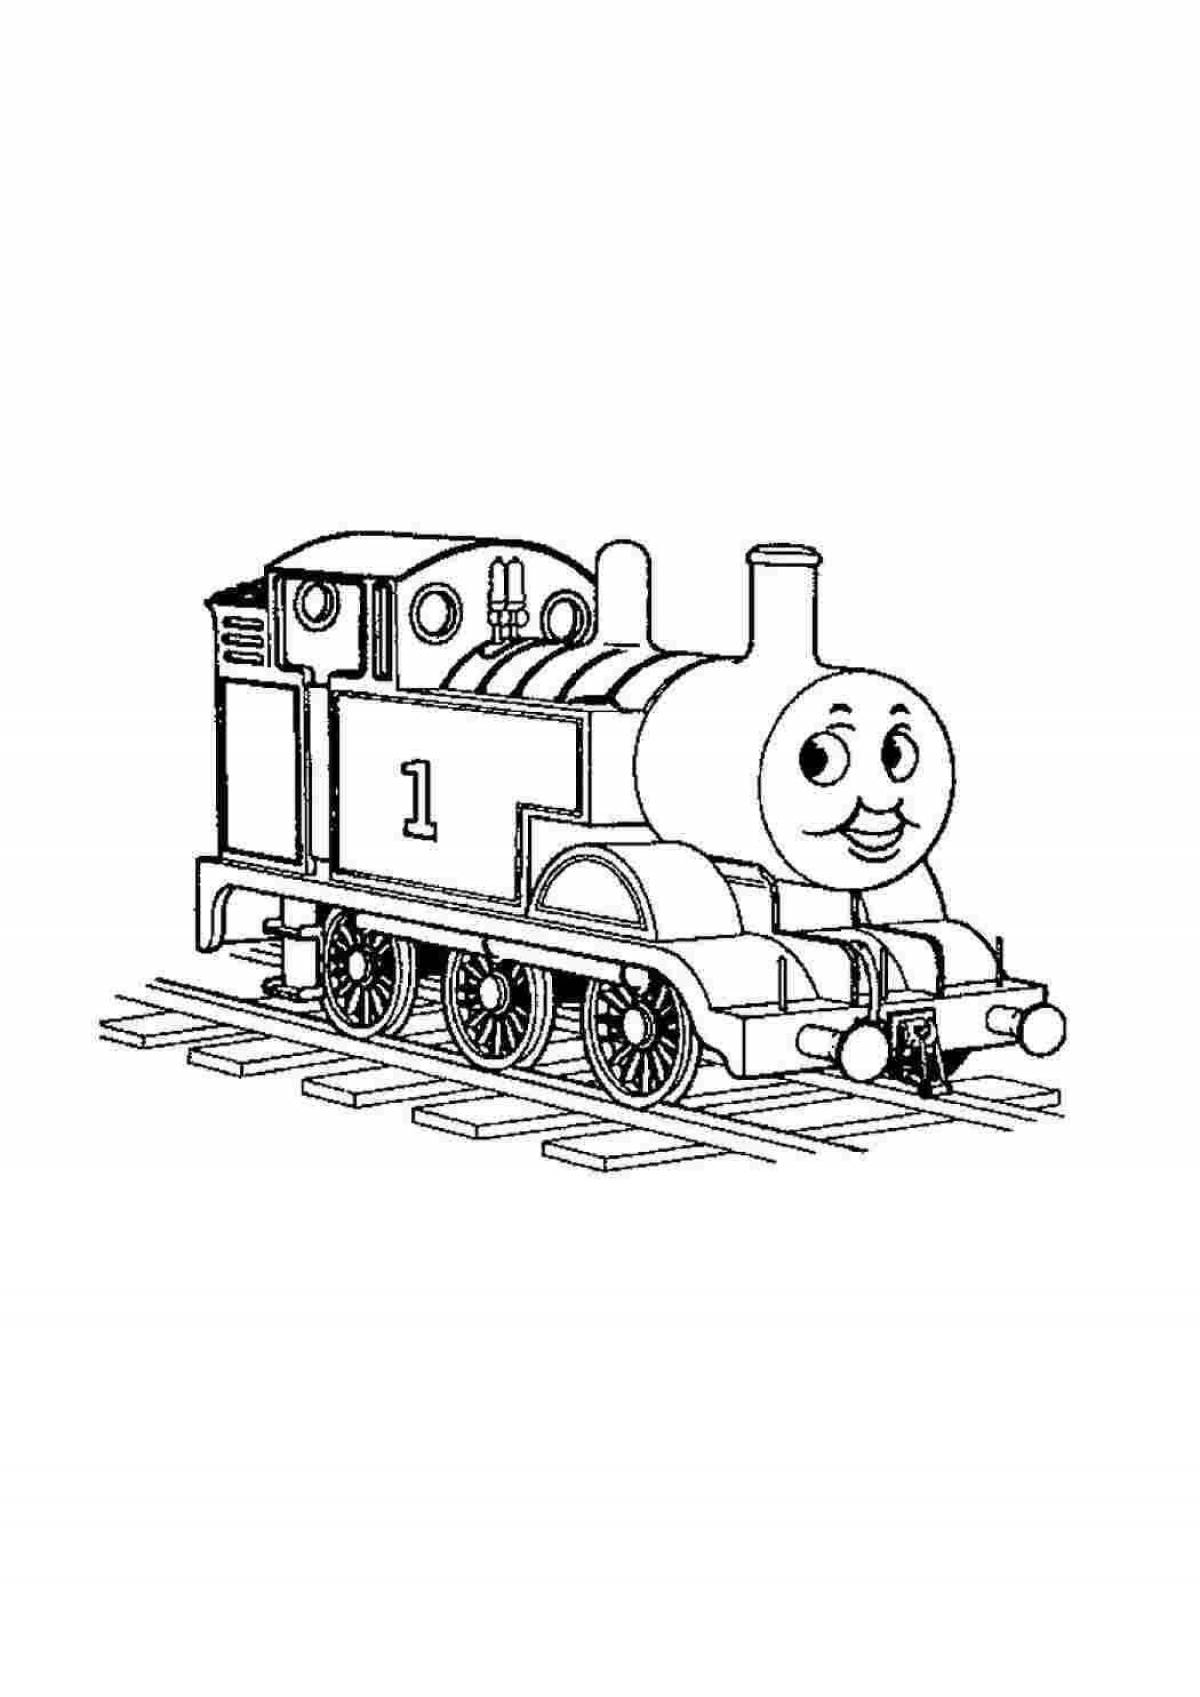 Lively thomas the tank engine scary coloring book